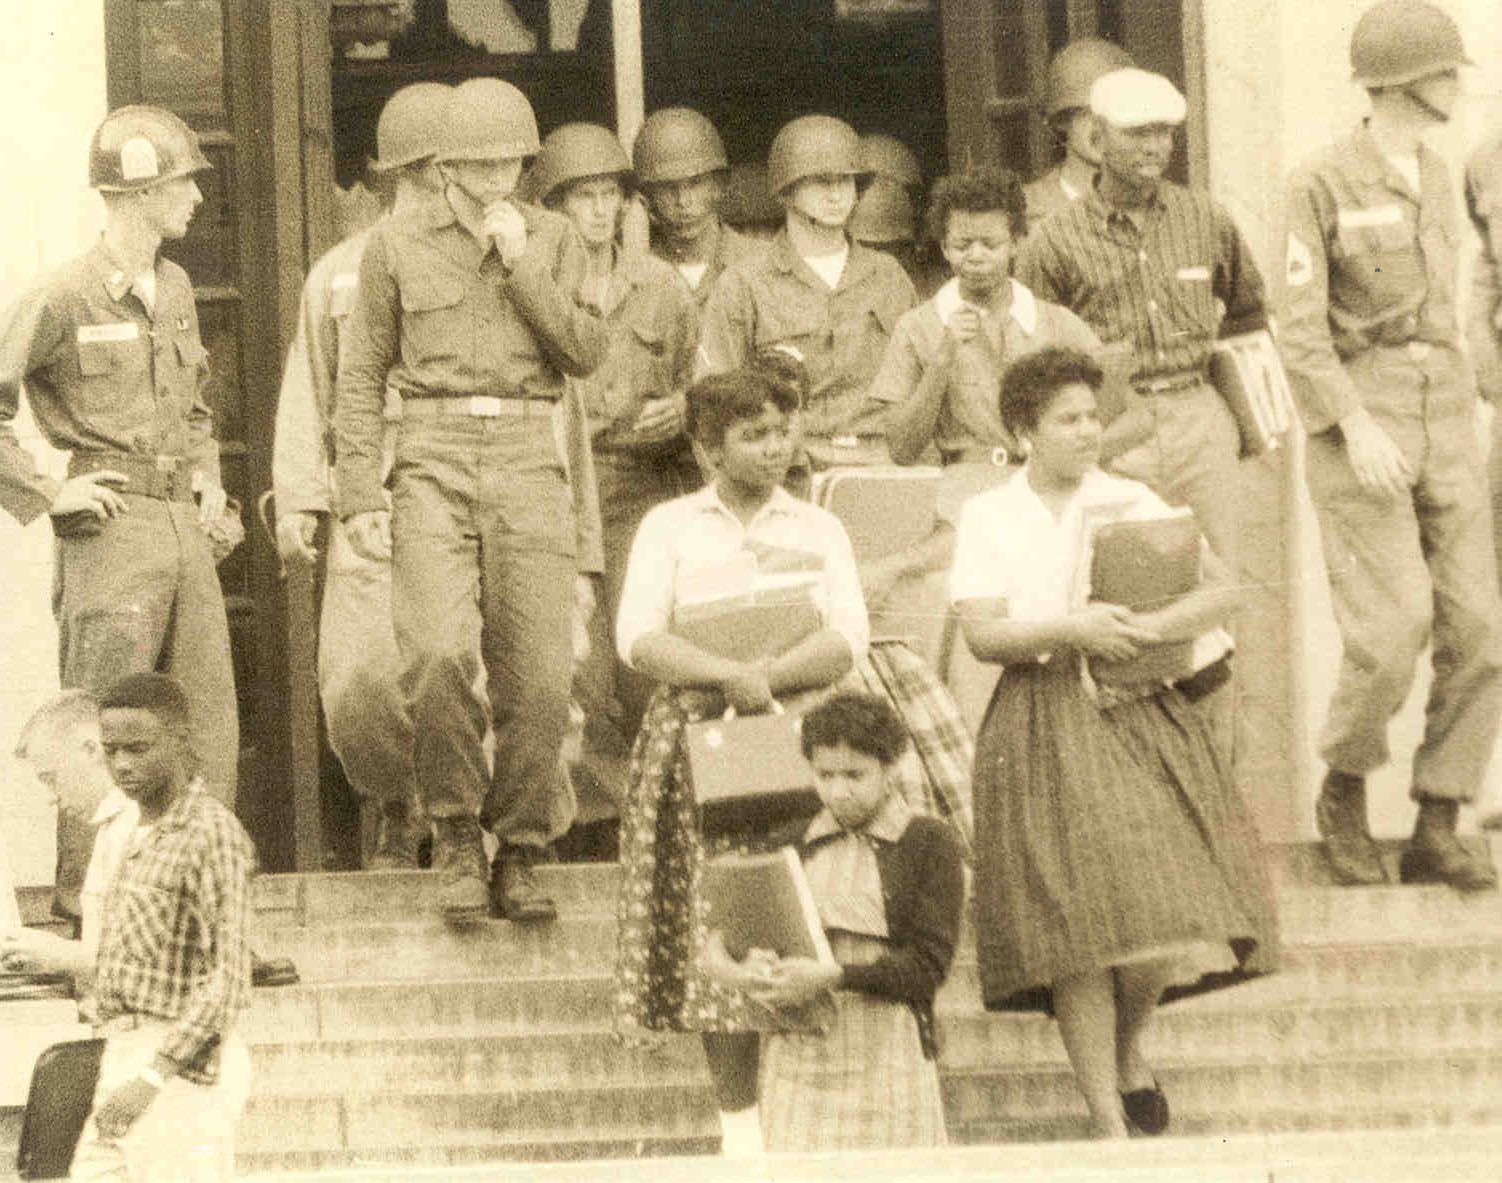 Elizabeth Eckford and the Little Rock Nine being escorted by the 101st Airborne Division.